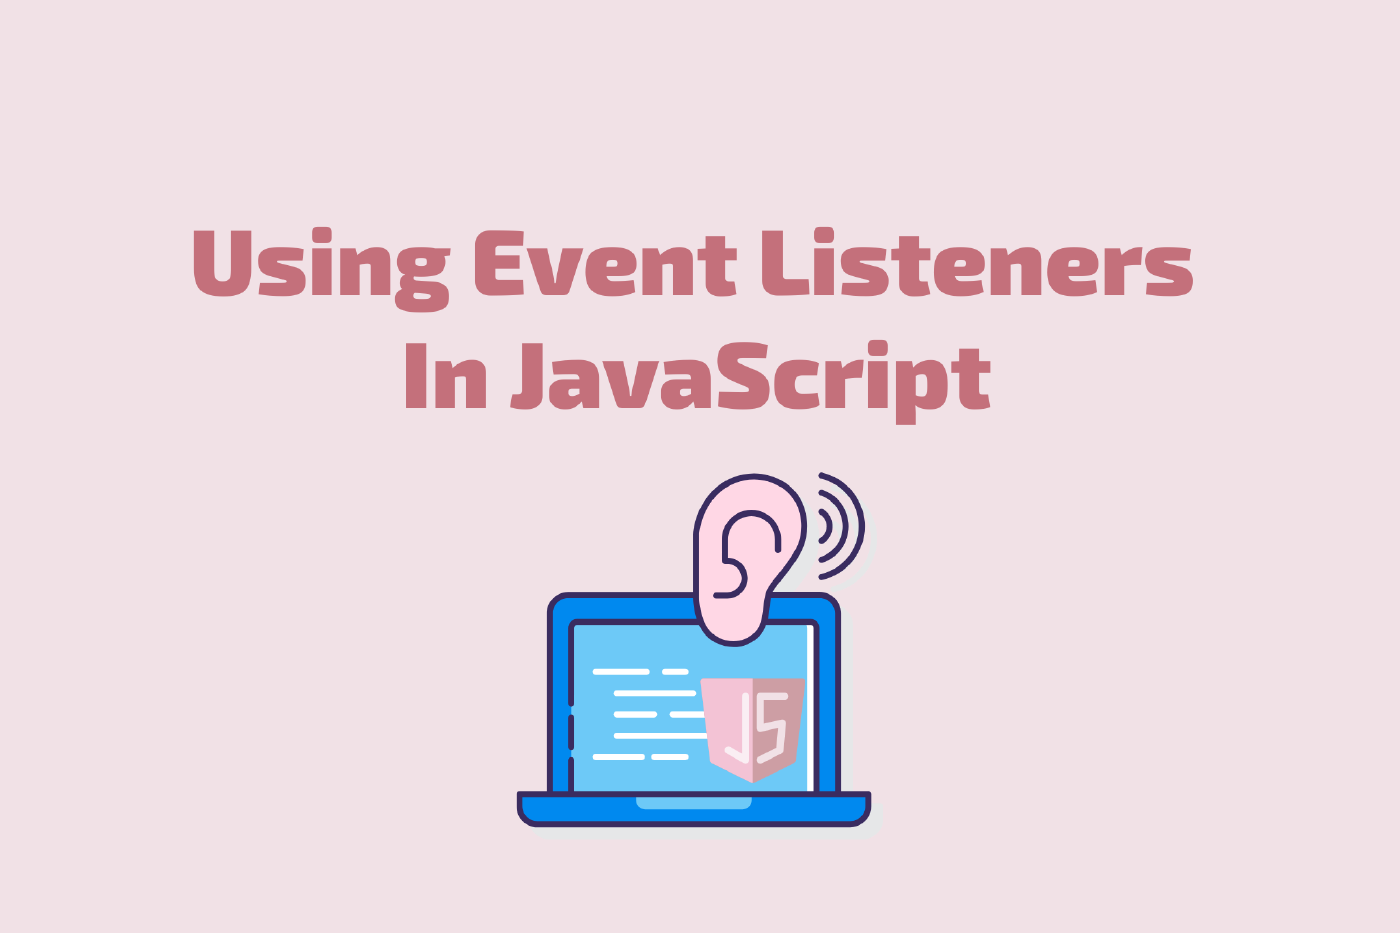 Using Event Listeners in JavaScript